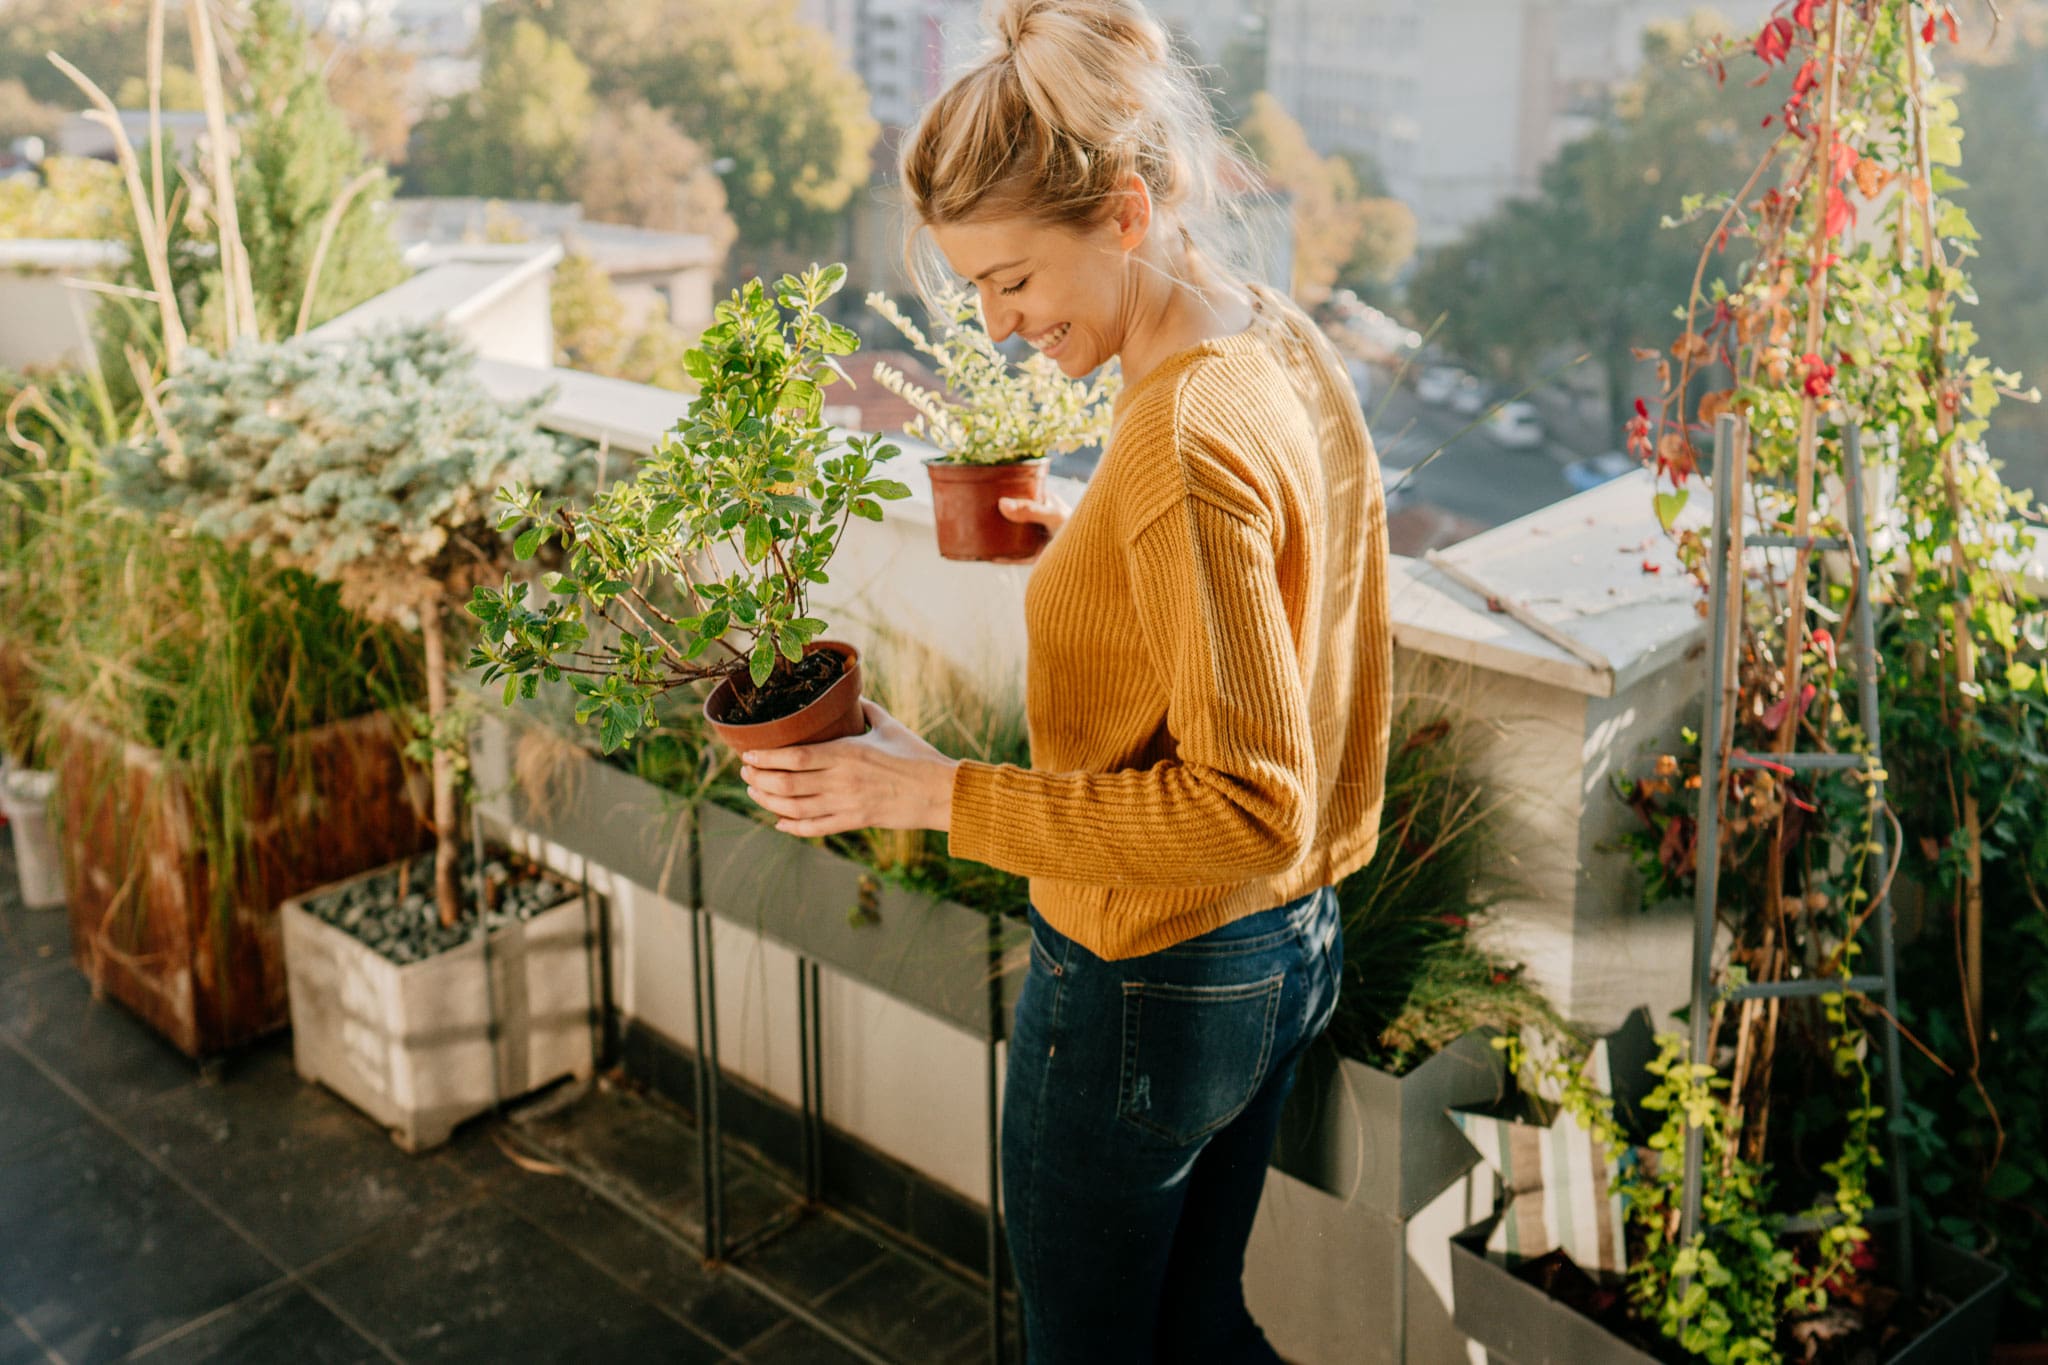 A woman standing in a space full of plants looking happy